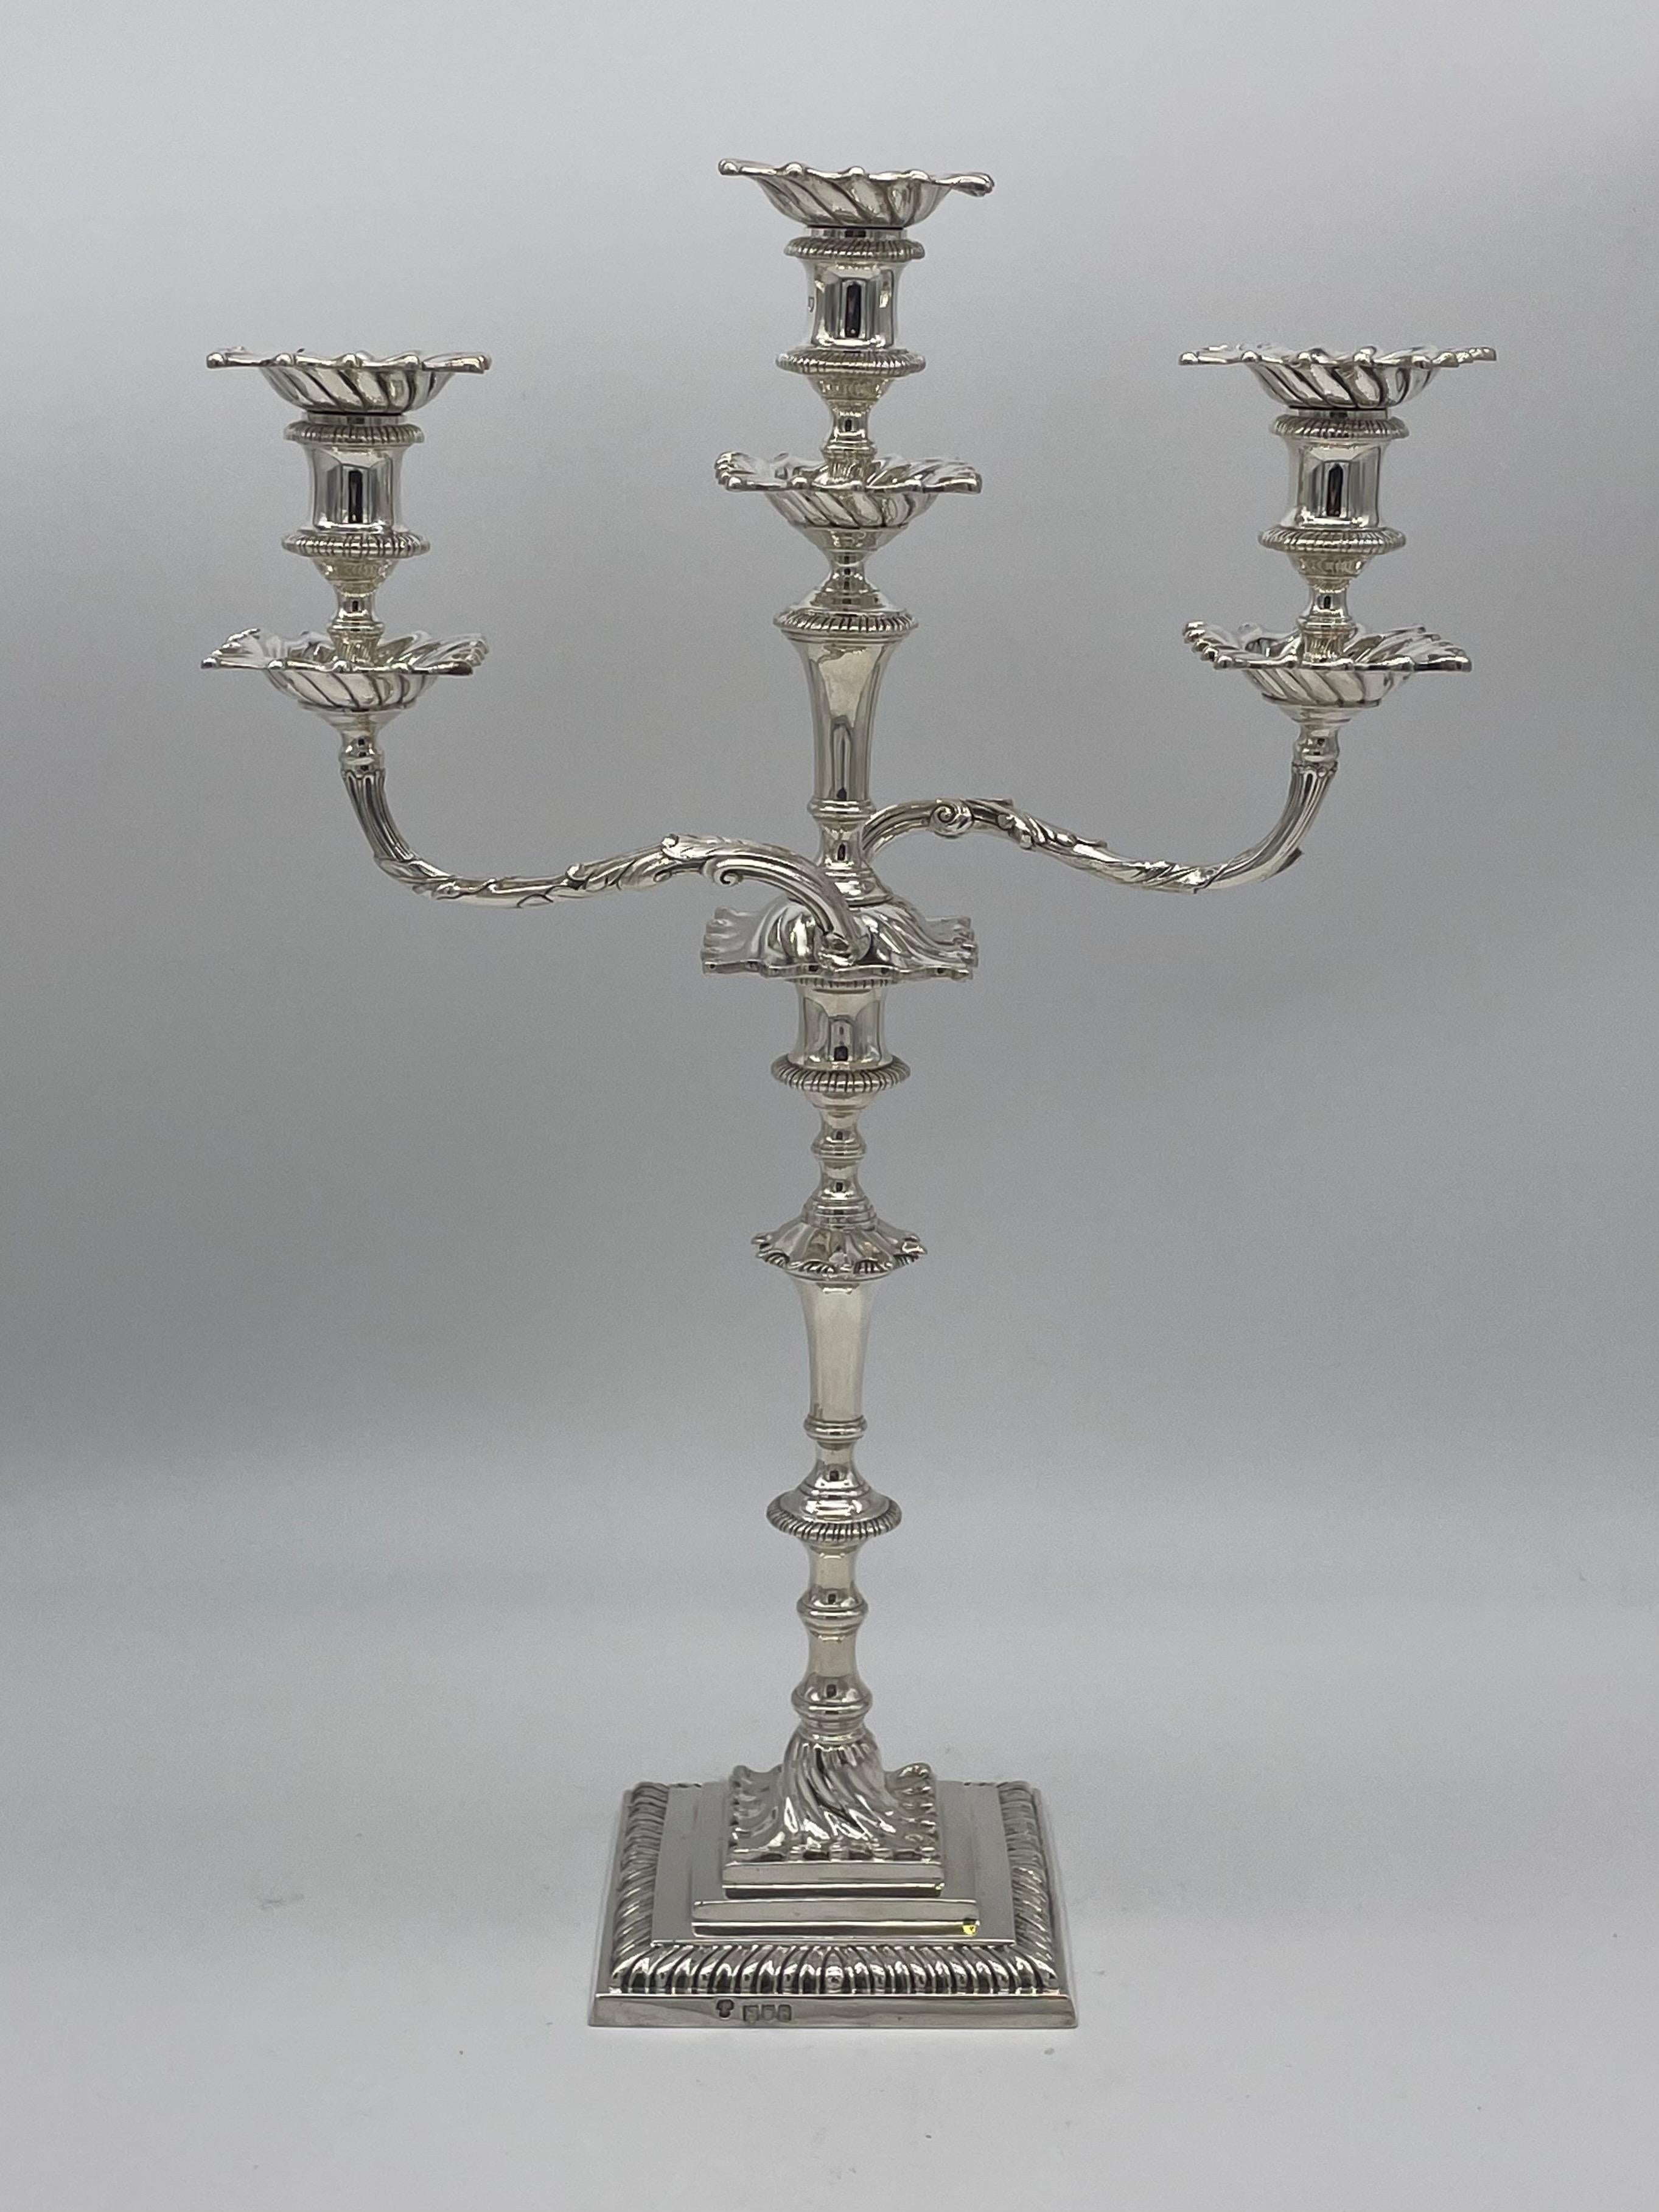 A pair of antique English sterling silver candelabra of cast form with a total weight of 3090gm.
These candelabra in London, 1913, to a style of candlestick first seen in the mid eighteenth century.
The arms, or branches remove, in order that the